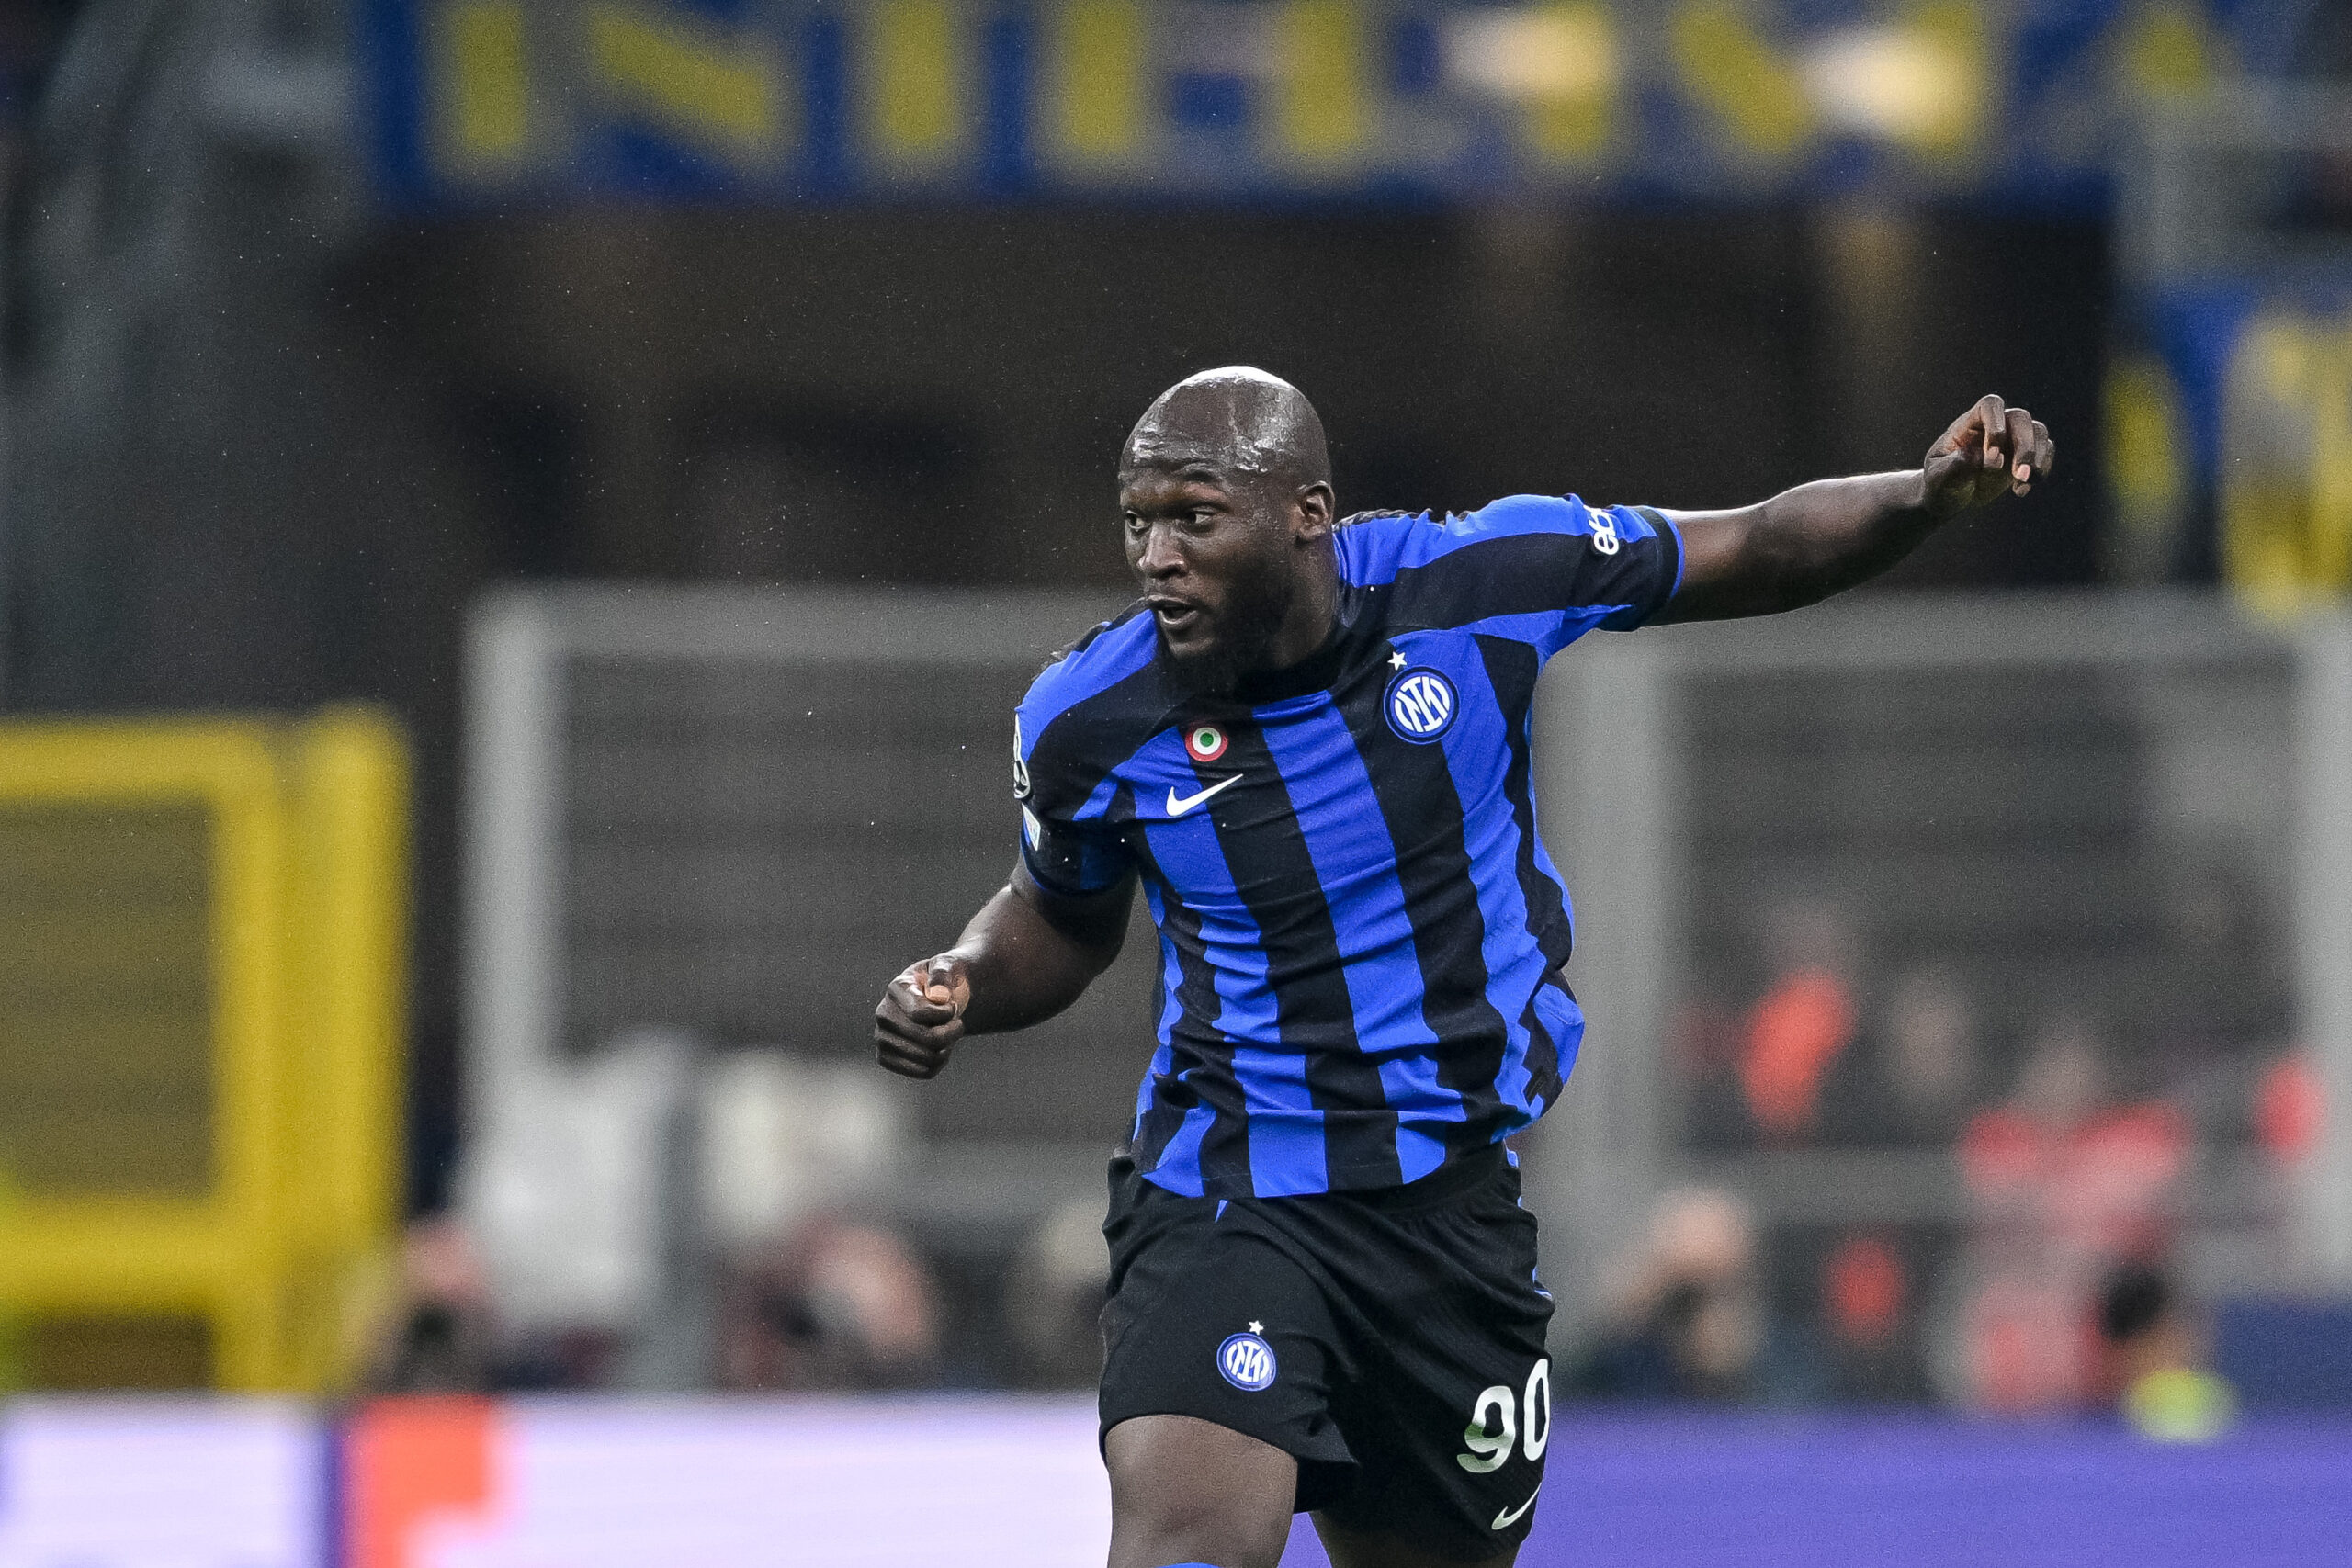 The collision course between Inter and Roma is a month away, but the Nerazzurri faithful are making preparations for the return of Romelu Lukaku.